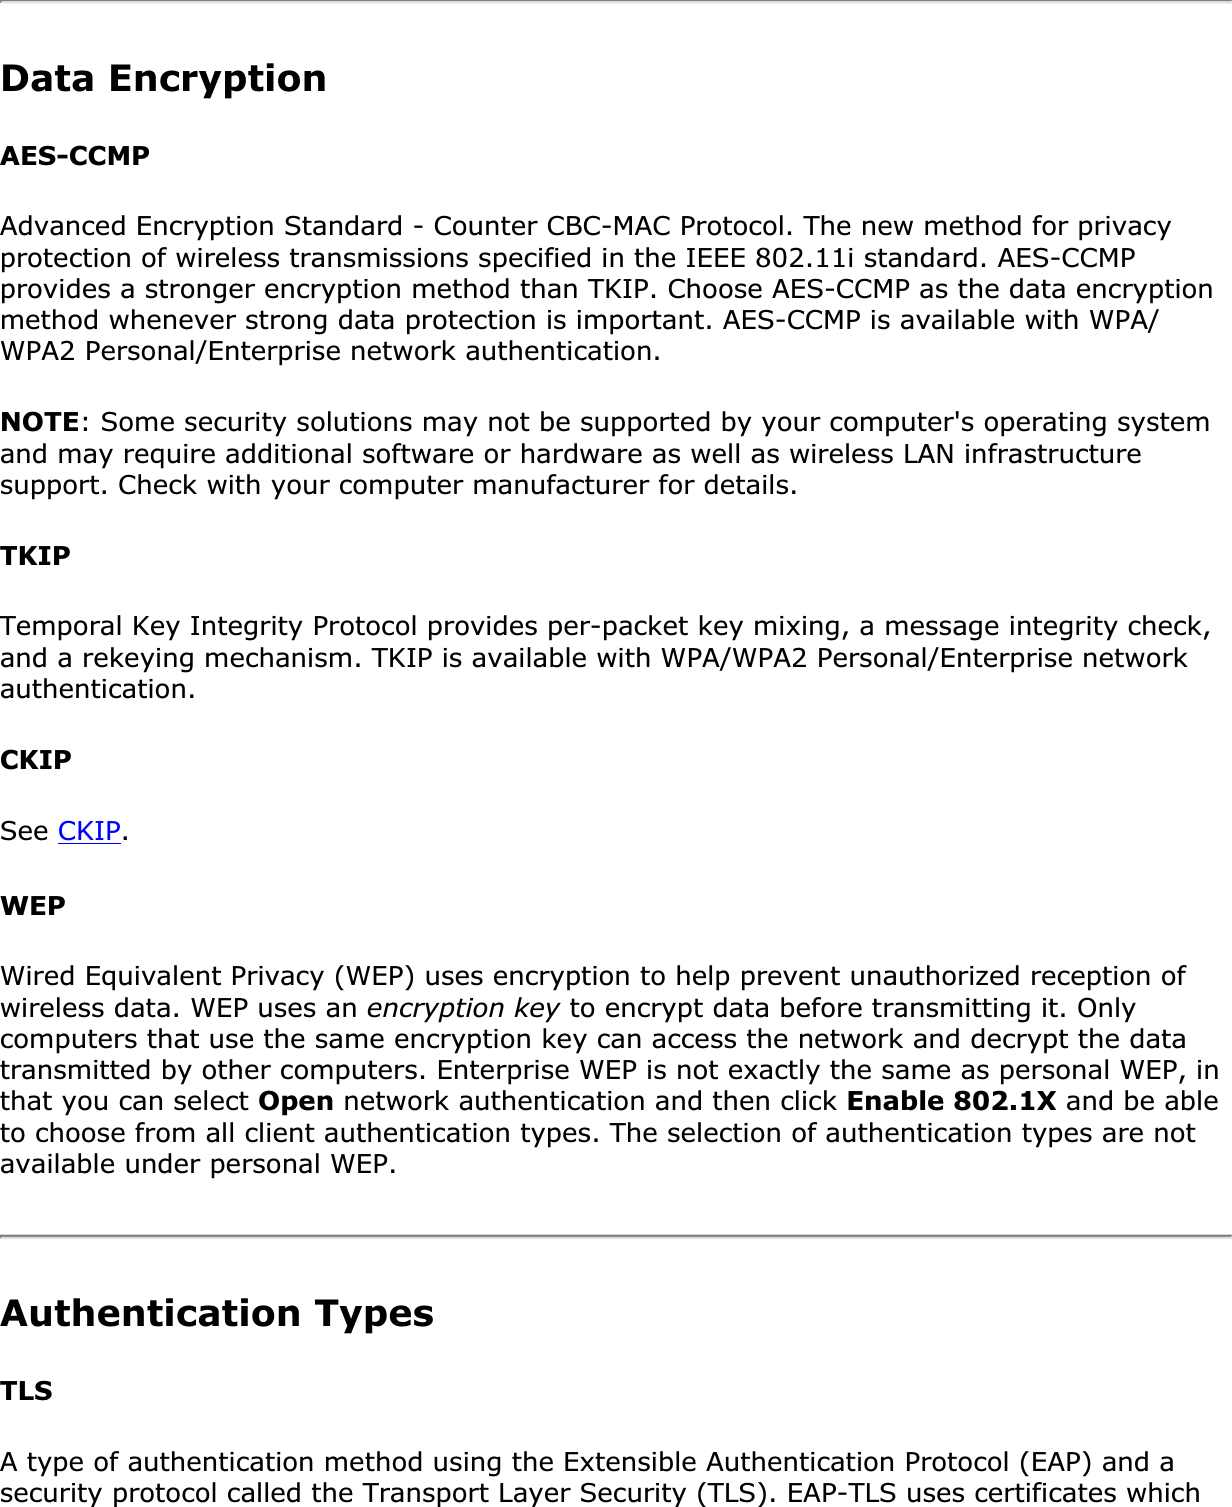 Data EncryptionAES-CCMPAdvanced Encryption Standard - Counter CBC-MAC Protocol. The new method for privacy protection of wireless transmissions specified in the IEEE 802.11i standard. AES-CCMP provides a stronger encryption method than TKIP. Choose AES-CCMP as the data encryption method whenever strong data protection is important. AES-CCMP is available with WPA/WPA2 Personal/Enterprise network authentication.NOTE: Some security solutions may not be supported by your computer&apos;s operating system and may require additional software or hardware as well as wireless LAN infrastructure support. Check with your computer manufacturer for details.TKIPTemporal Key Integrity Protocol provides per-packet key mixing, a message integrity check, and a rekeying mechanism. TKIP is available with WPA/WPA2 Personal/Enterprise network authentication.CKIPSee CKIP.WEPWired Equivalent Privacy (WEP) uses encryption to help prevent unauthorized reception of wireless data. WEP uses an encryption key to encrypt data before transmitting it. Only computers that use the same encryption key can access the network and decrypt the data transmitted by other computers. Enterprise WEP is not exactly the same as personal WEP, in that you can select Open network authentication and then click Enable 802.1X and be able to choose from all client authentication types. The selection of authentication types are not available under personal WEP.Authentication Types TLSA type of authentication method using the Extensible Authentication Protocol (EAP) and a security protocol called the Transport Layer Security (TLS). EAP-TLS uses certificates which 